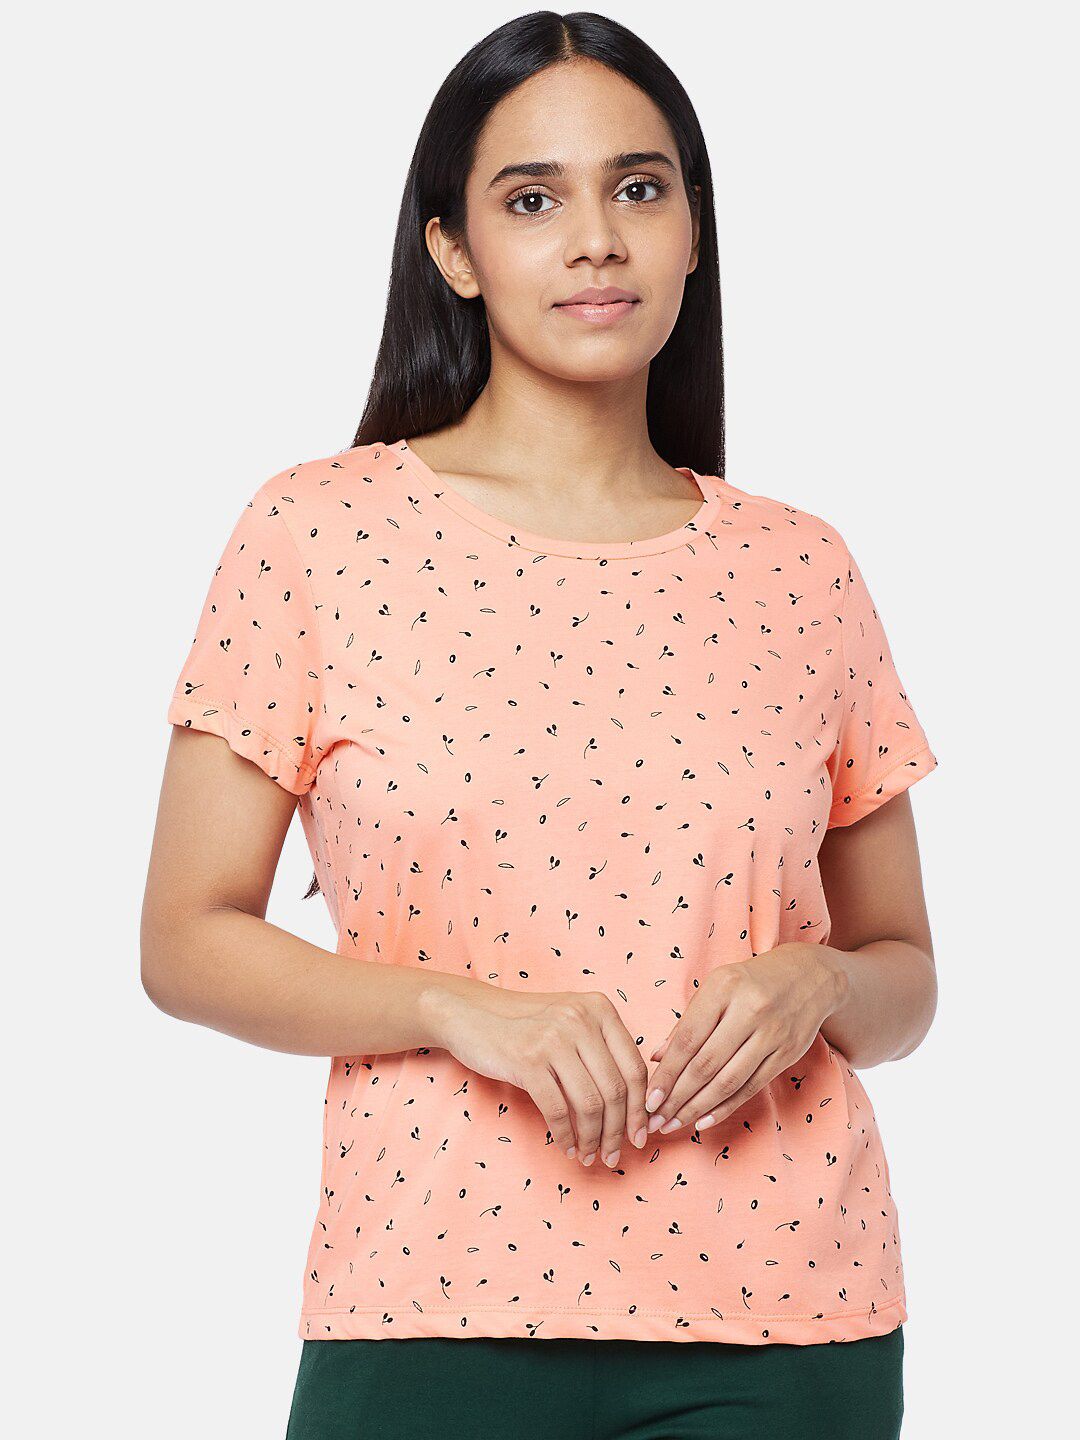 Dreamz by Pantaloons Women Pink Pure Cotton Printed Pure Cotton Lounge T-shirt Price in India